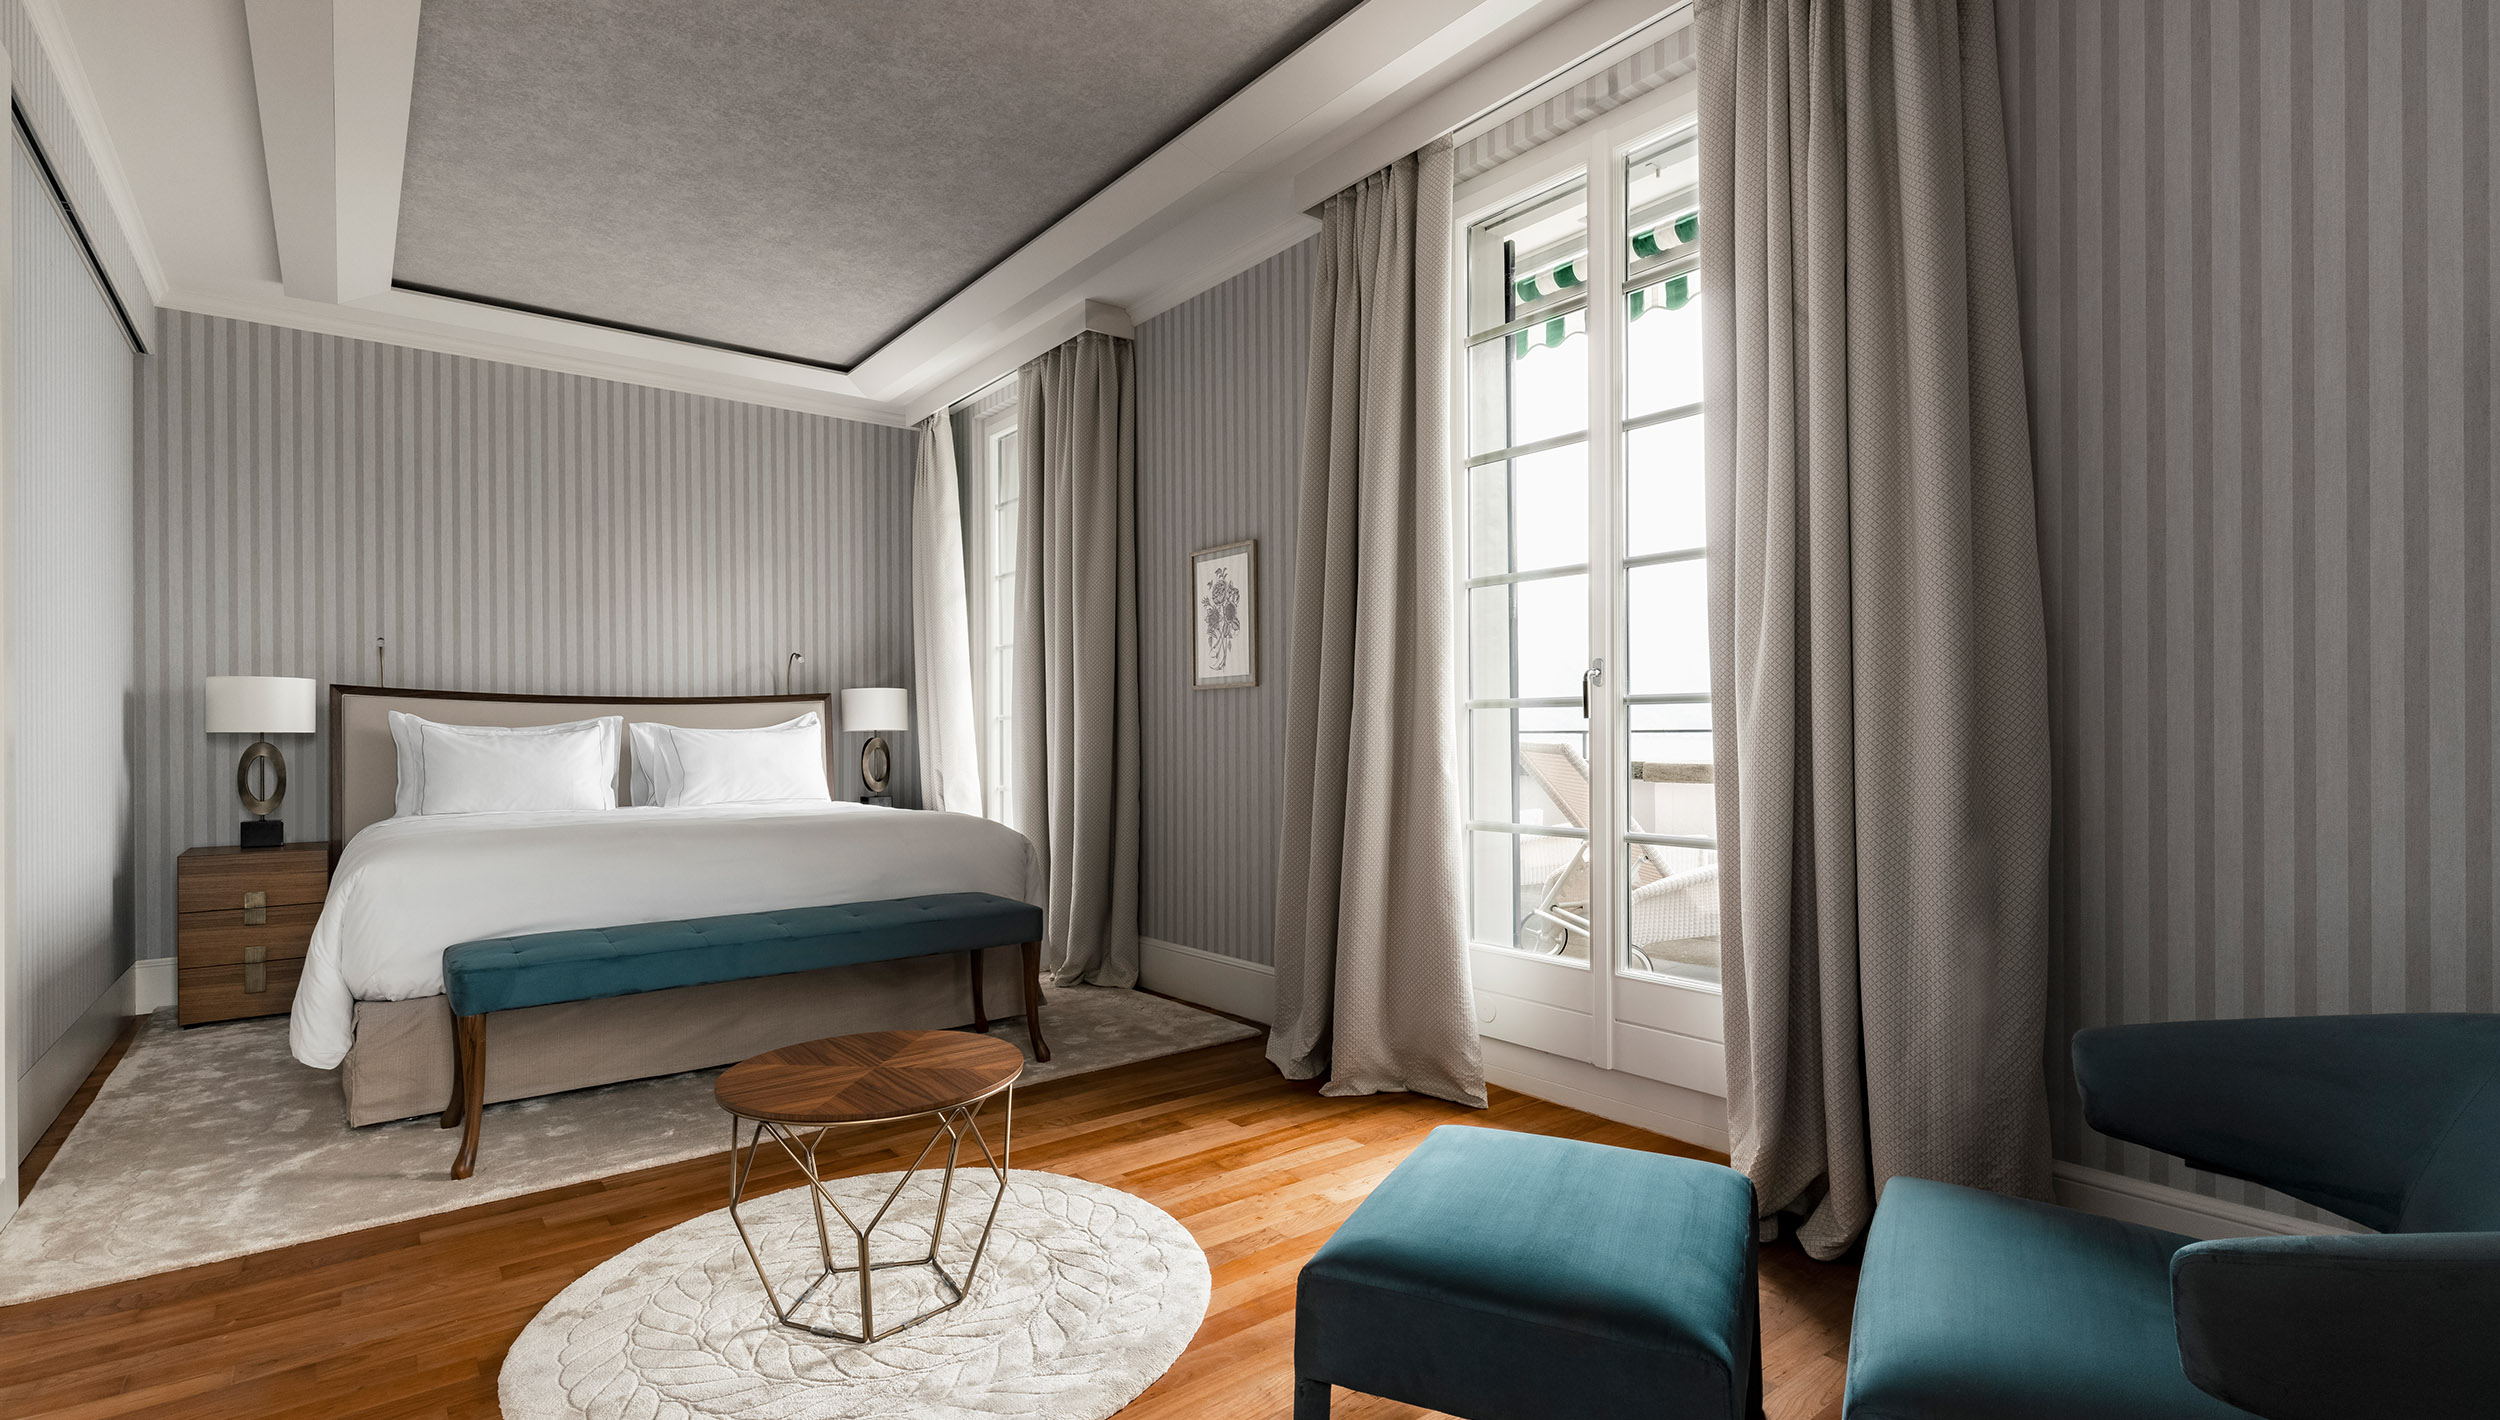 <h4>DOUBLE CLASSIC</h4><p class="small">All rooms boast stunning views over the Swiss Alps with their own private balcony or terrace to enjoy a moment immersed in nature.</p>